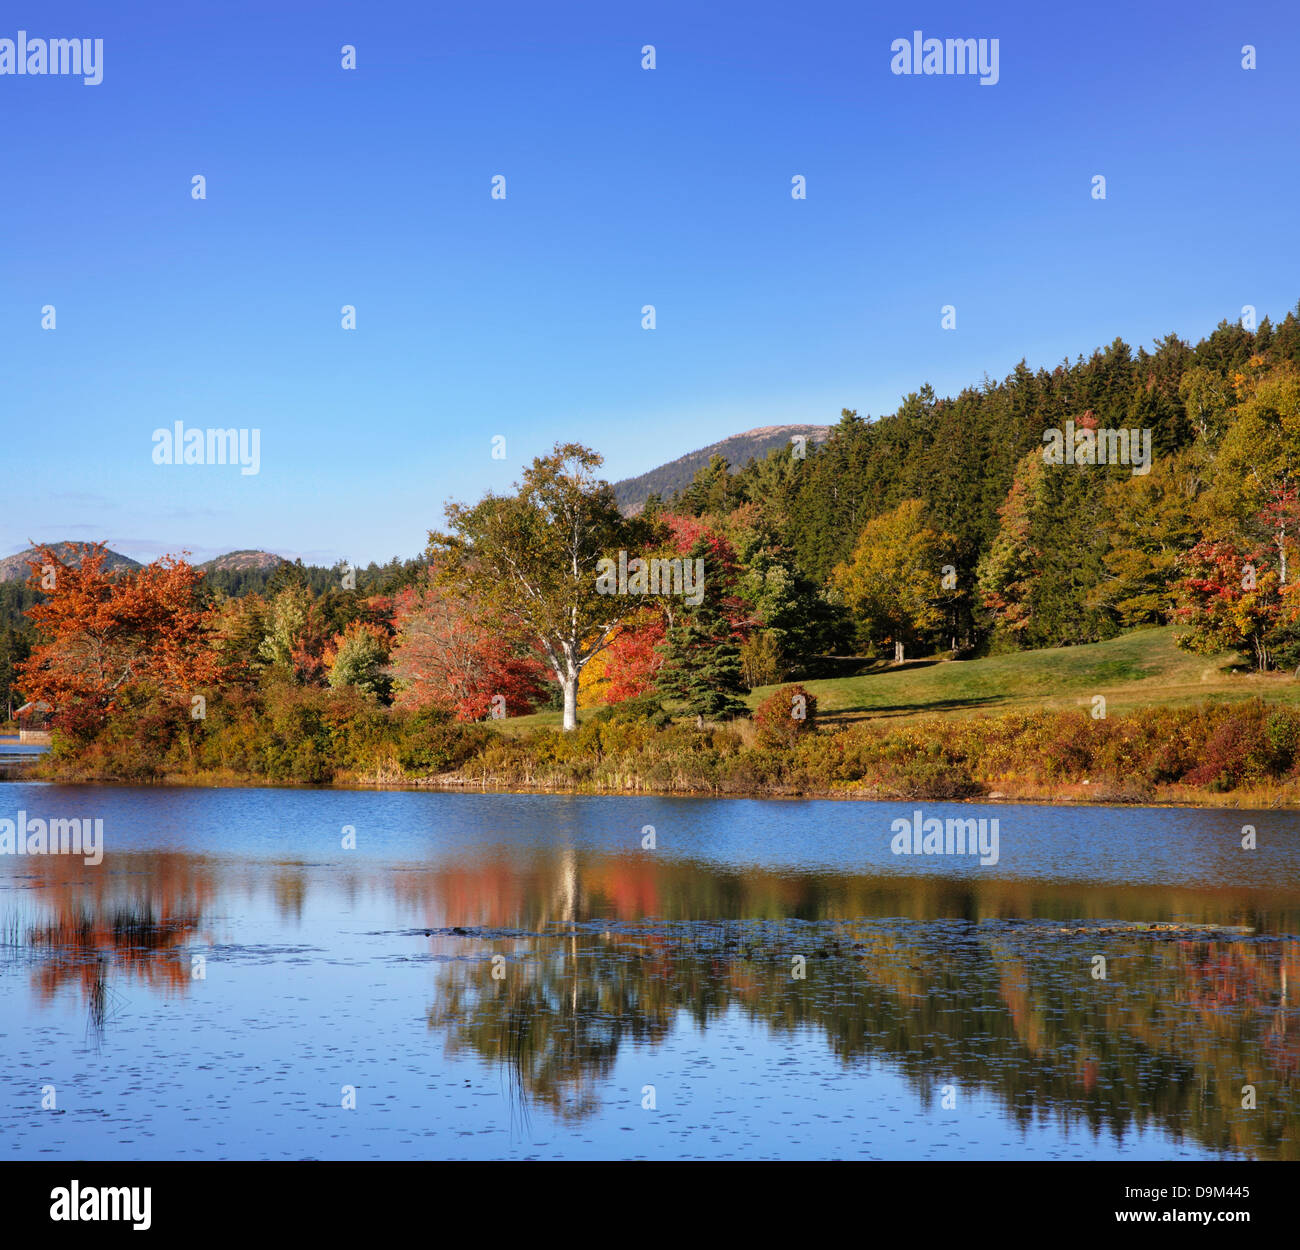 Little Long Pond In The Colors Of Autumn, Mount Desert Island, Acadia National Park, Maine, USA Stock Photo